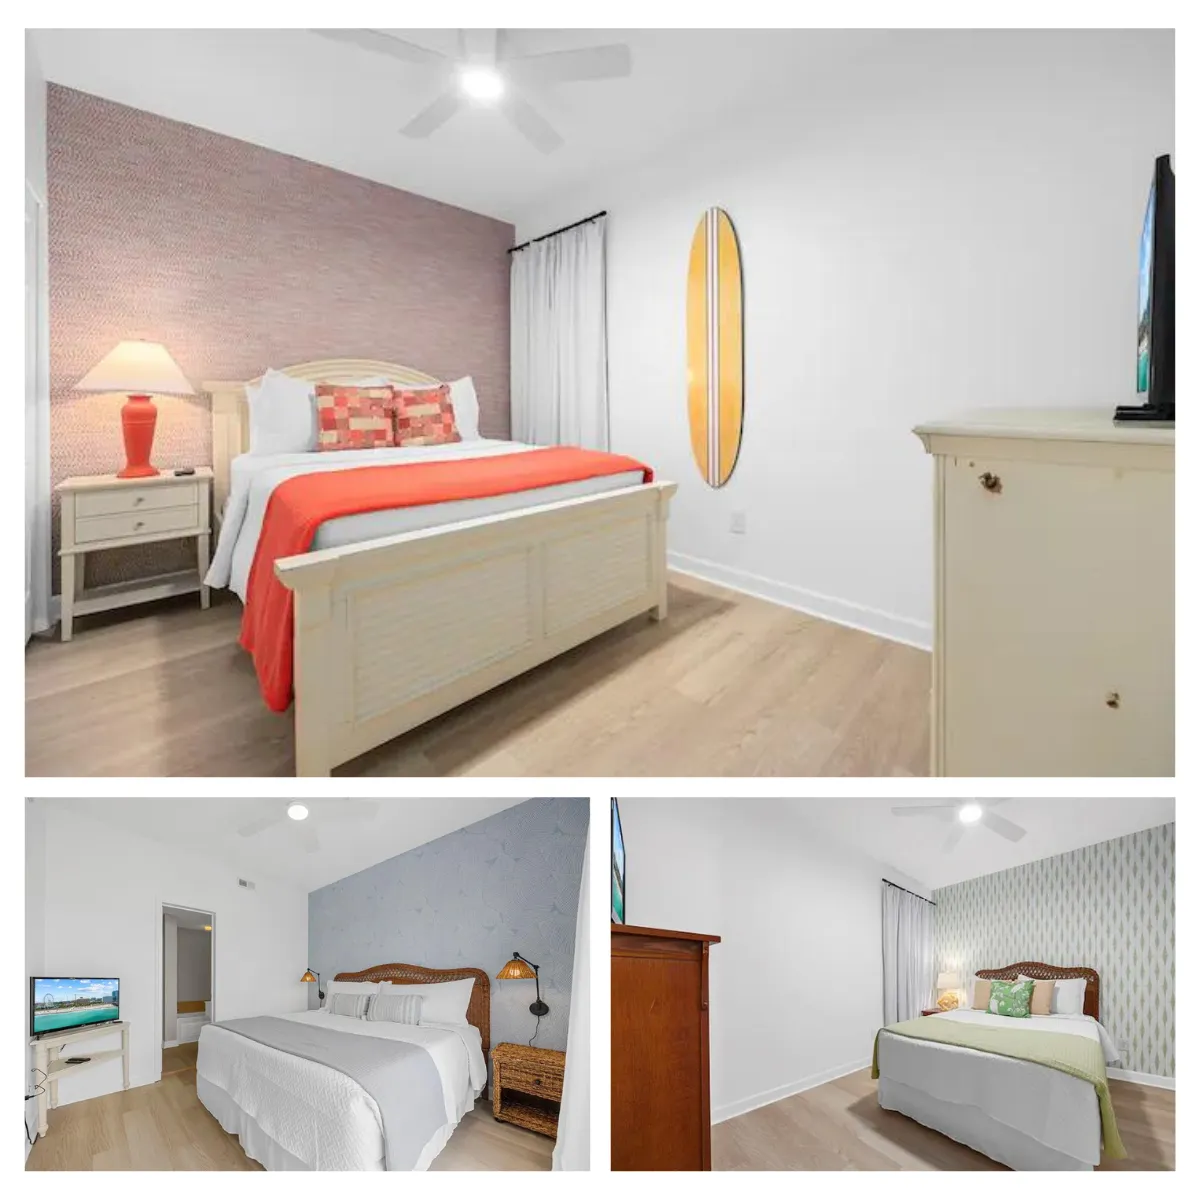 Experience the luxury of Bedroom 4, 5, and 6 on the second floor of Cast-A-Waves, each equipped with comfy beds, TVs, and private bathrooms.